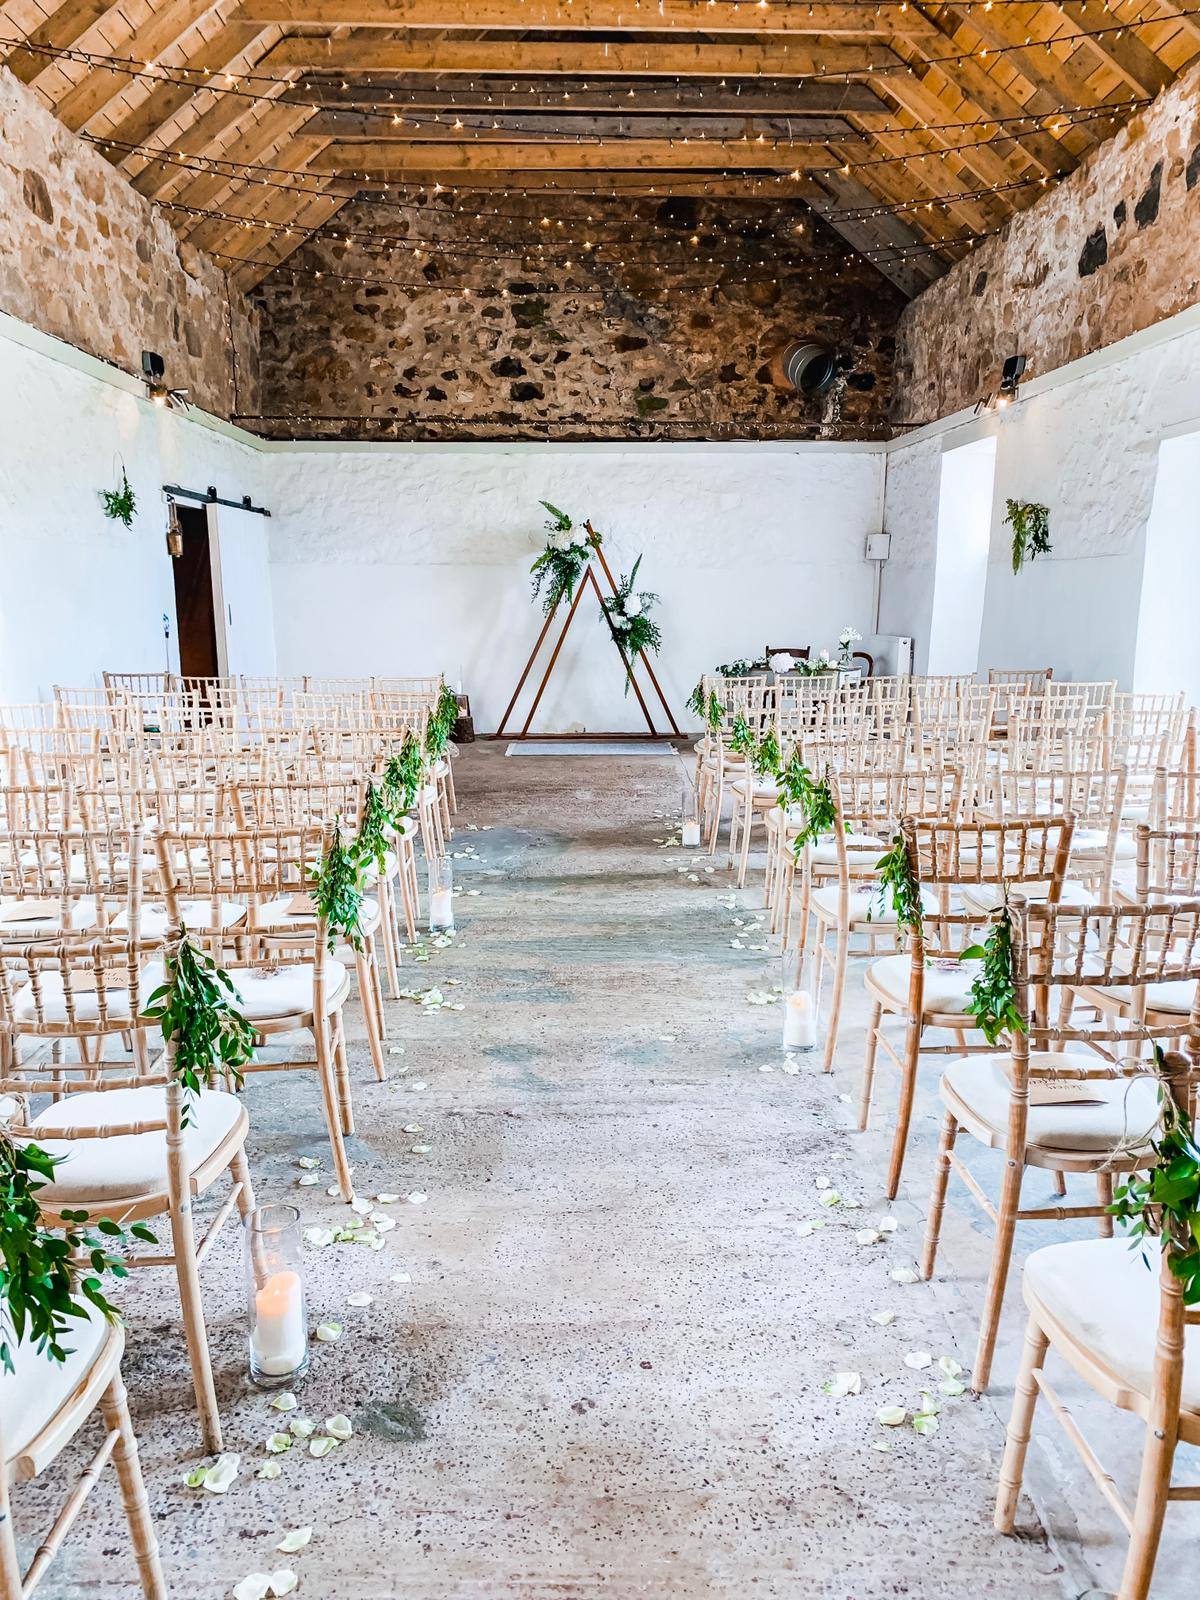 The Cow Shed, Crail Wedding Venue